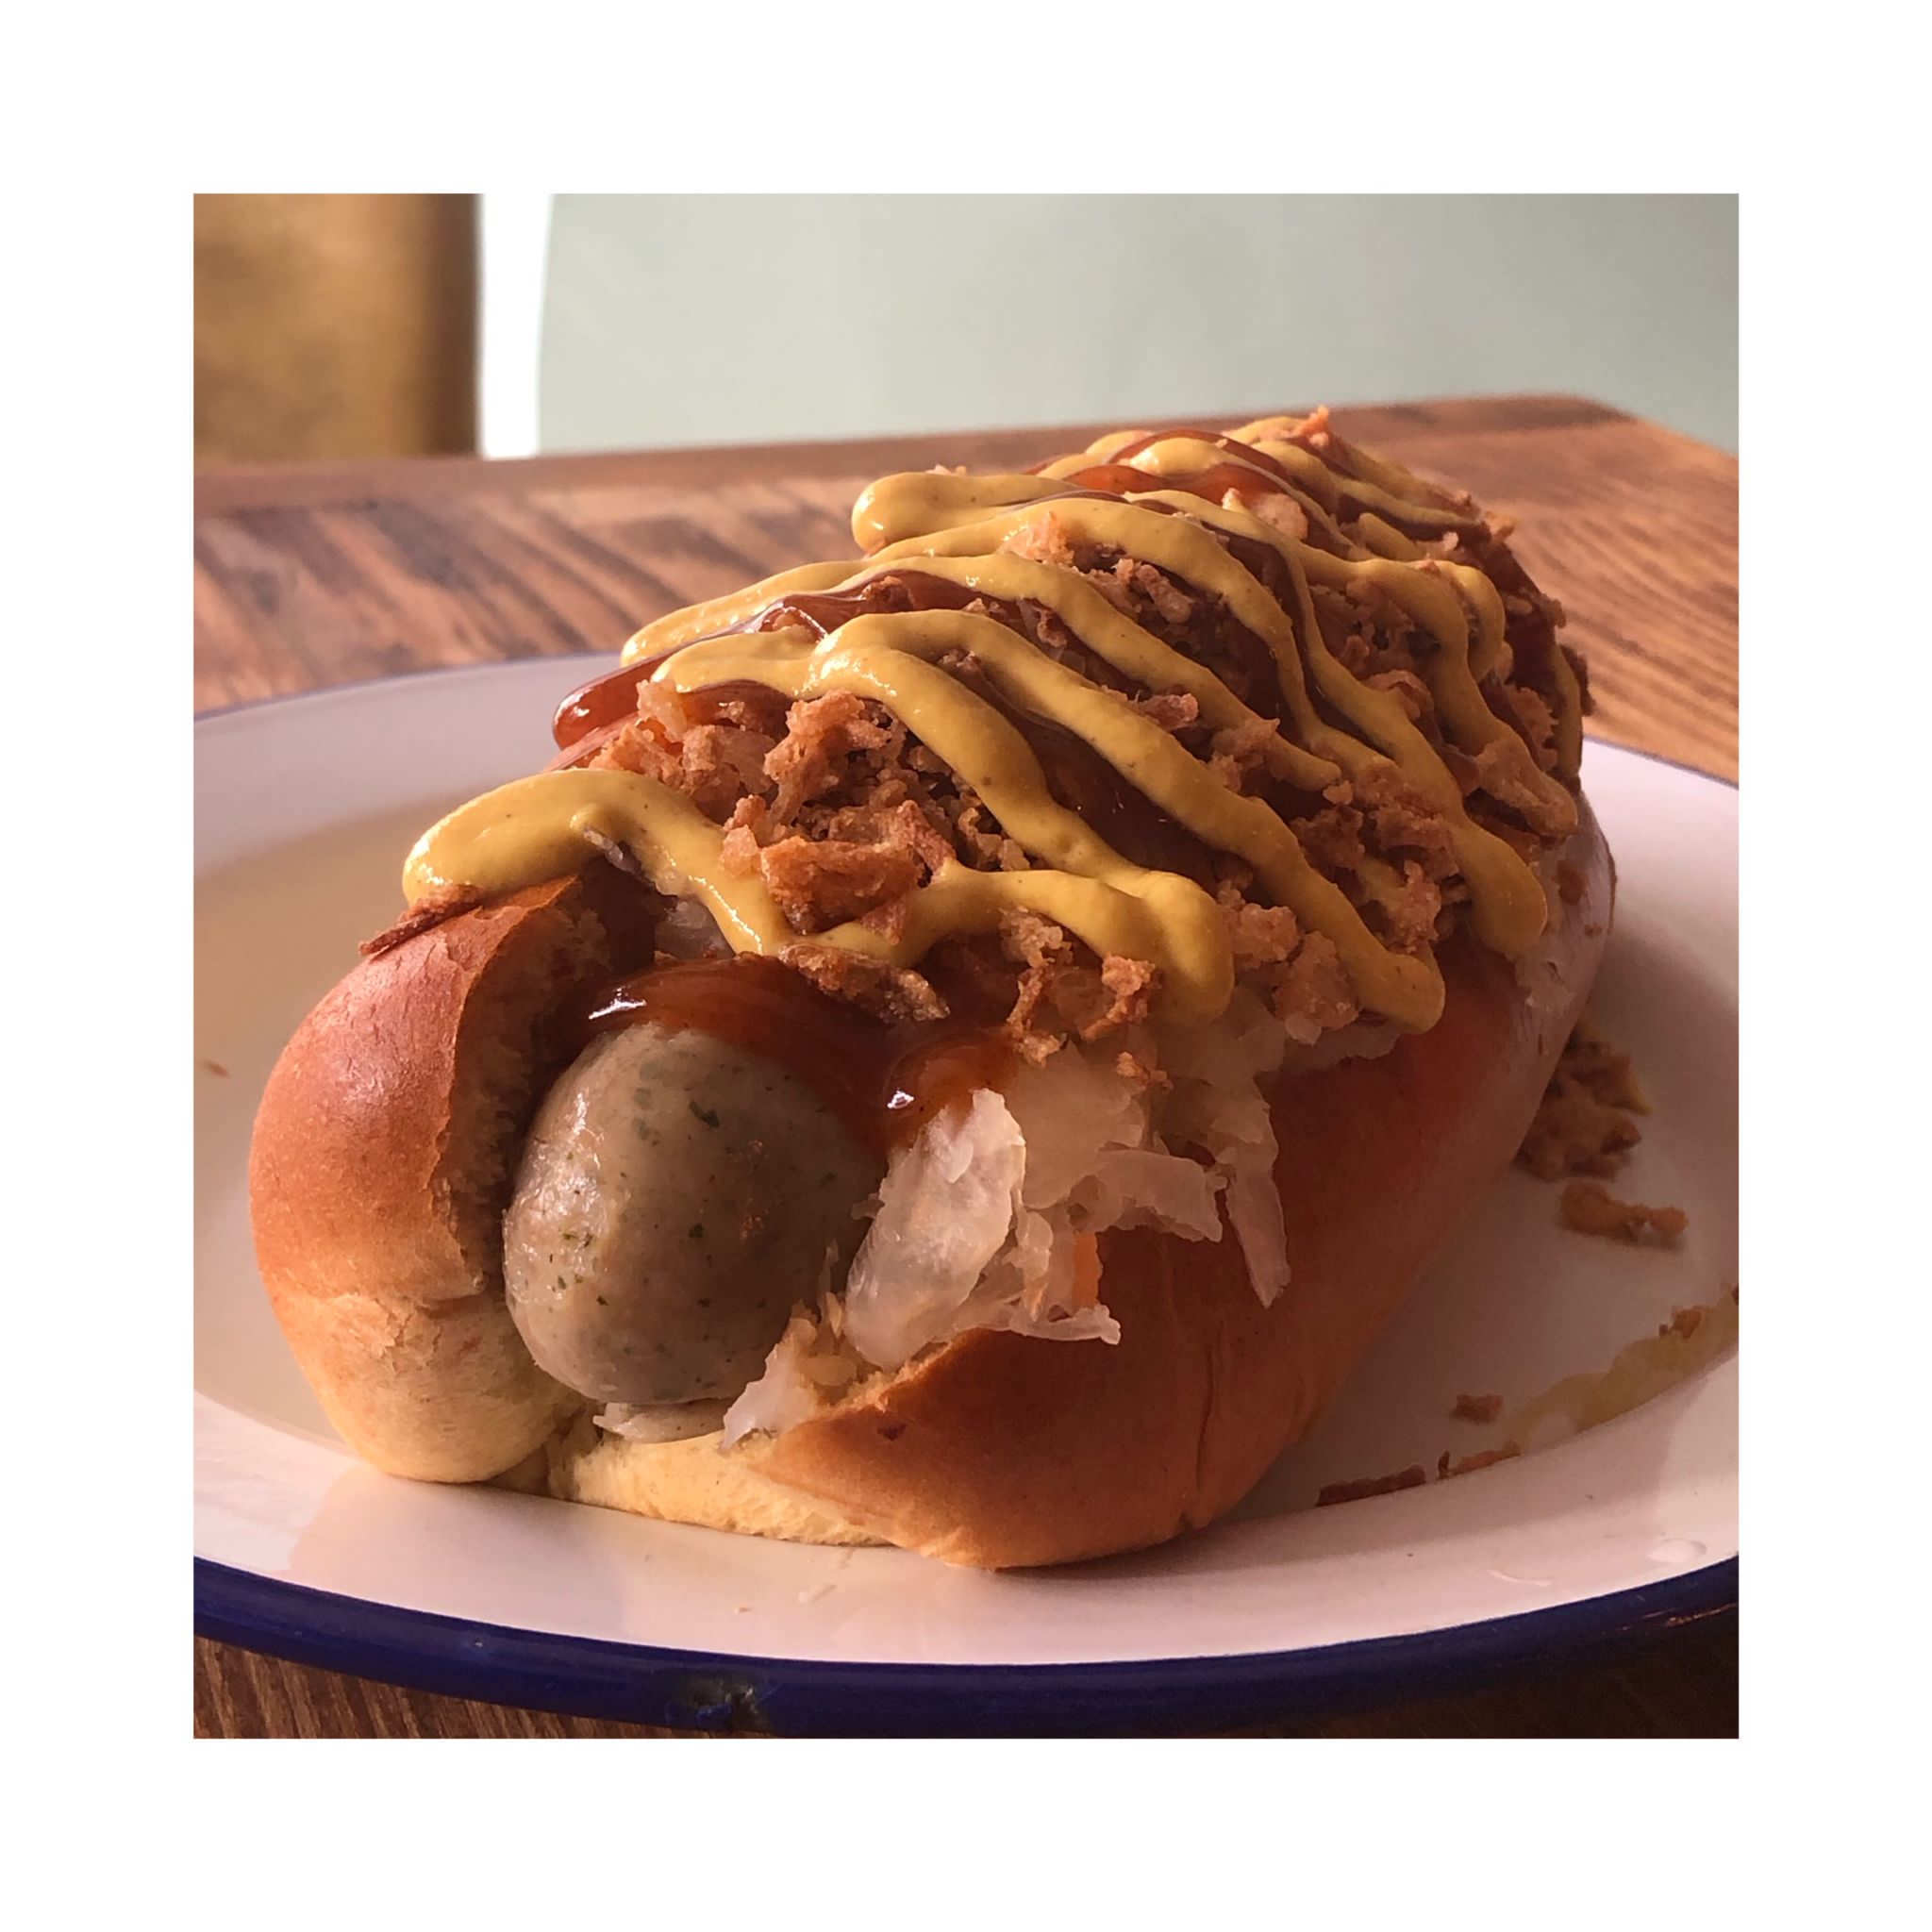 Fuggles Hot Dogs: A review by Bibi Roy - image